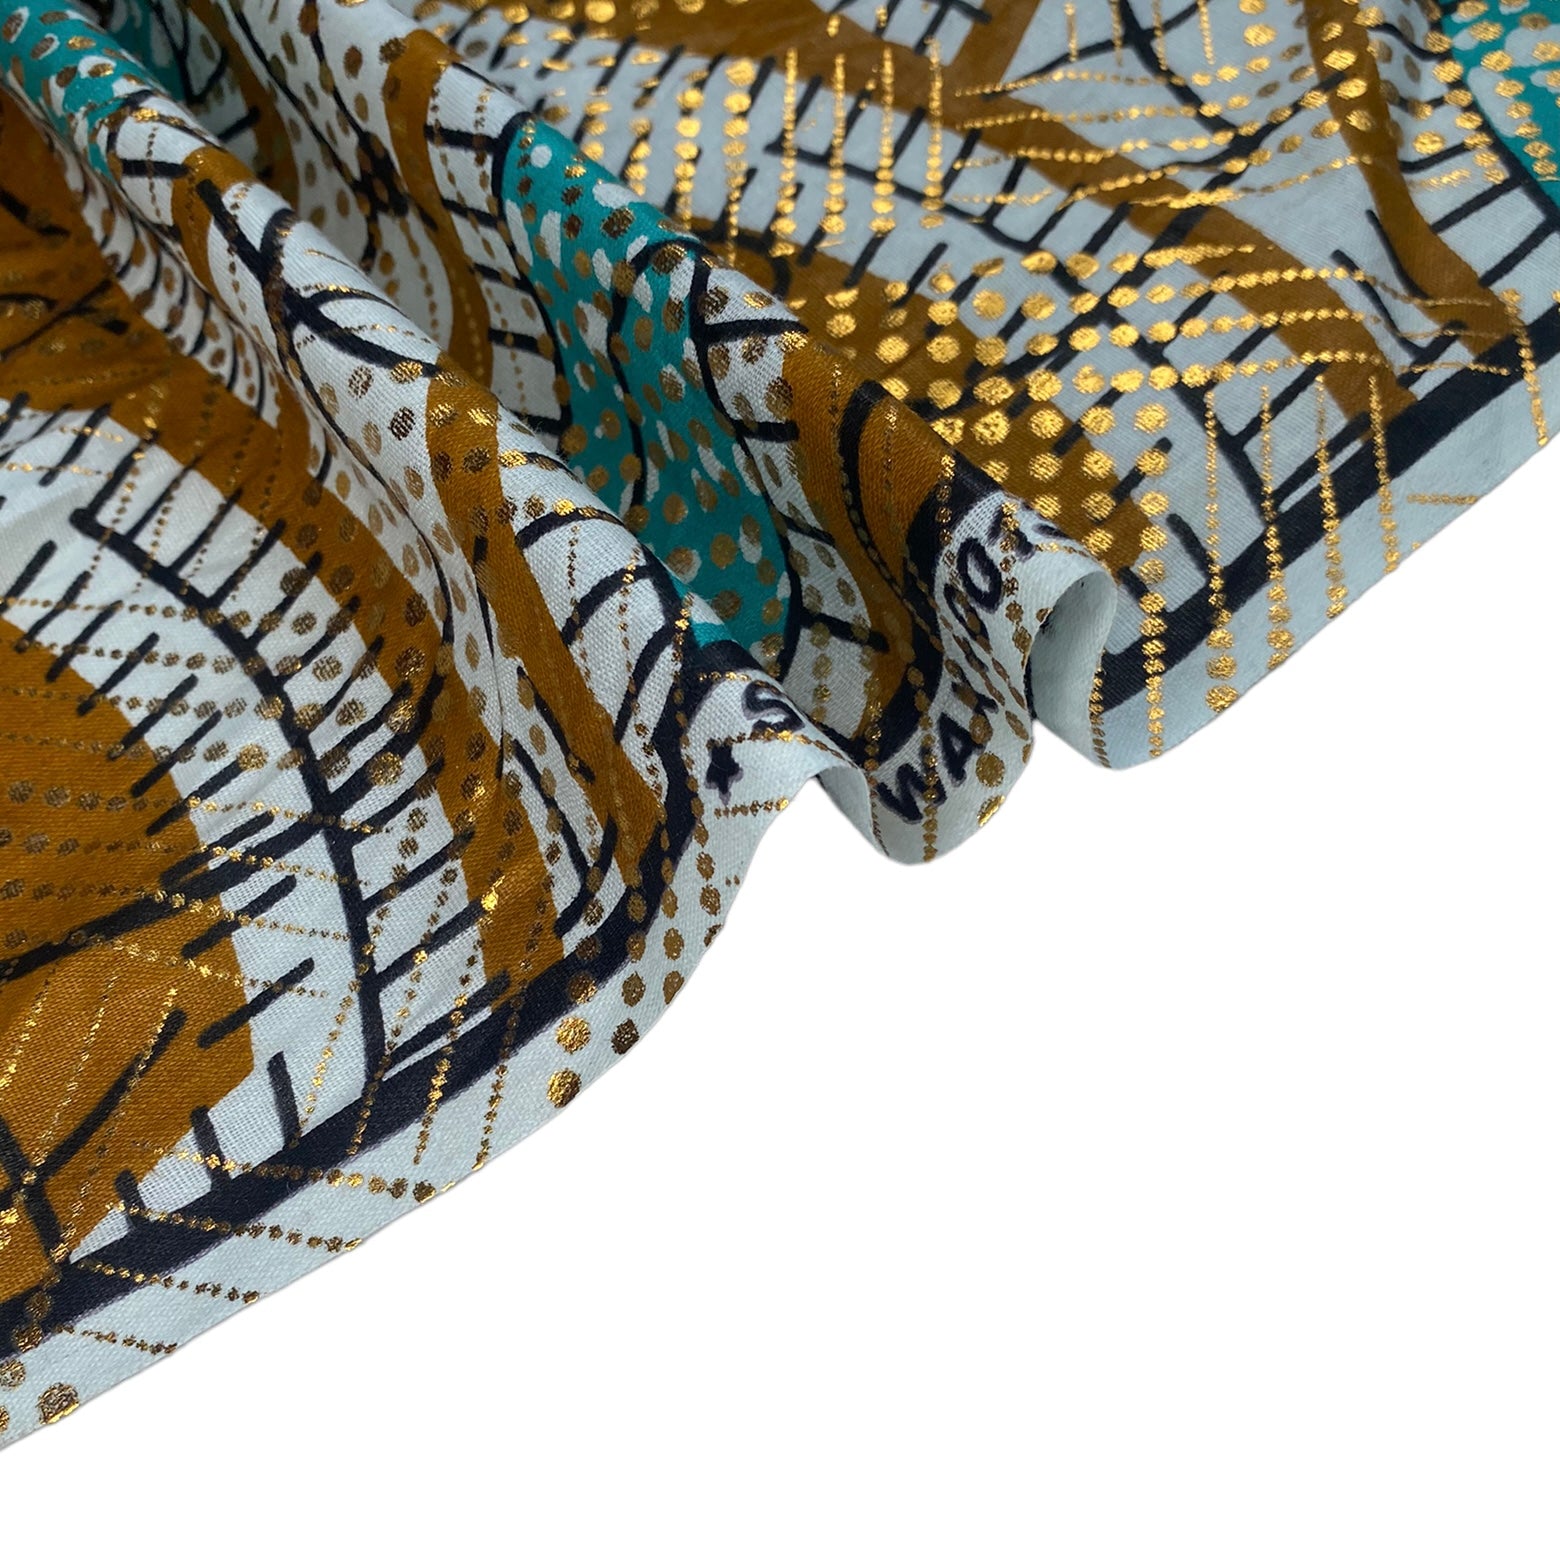 Waxed African Printed Cotton - Metallic Gold/White/Blue